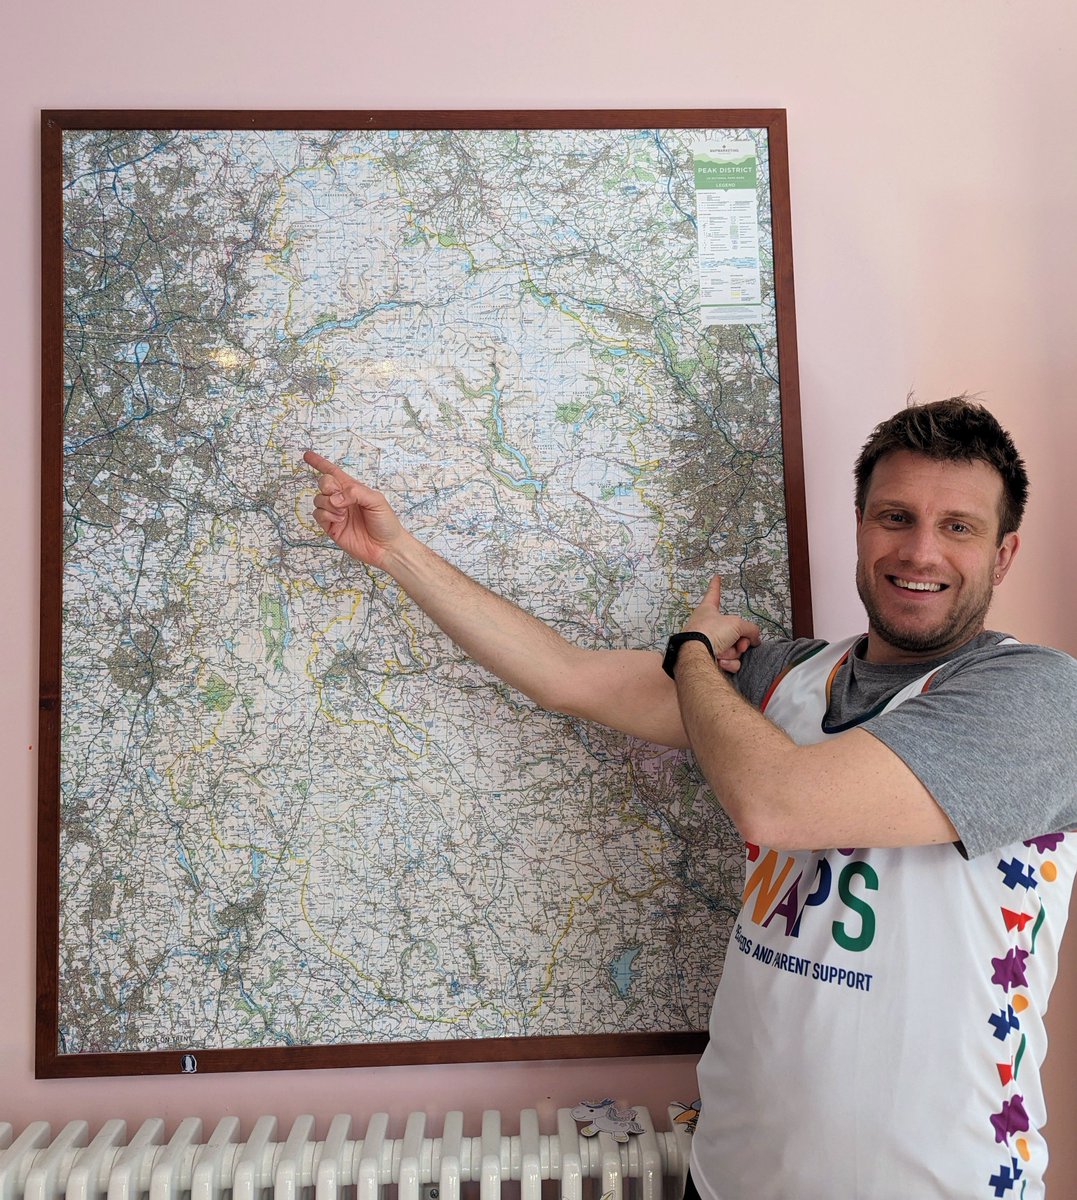 We want to say GOOD LUCK to Rob Holdsworth today as he takes on The Peak Divide Challenge in aid of SNAPS! He is running 75km from Manchester to Sheffield over two days! He's so far raised over £350, if you'd like to support him, click here: buff.ly/3QaTy9q